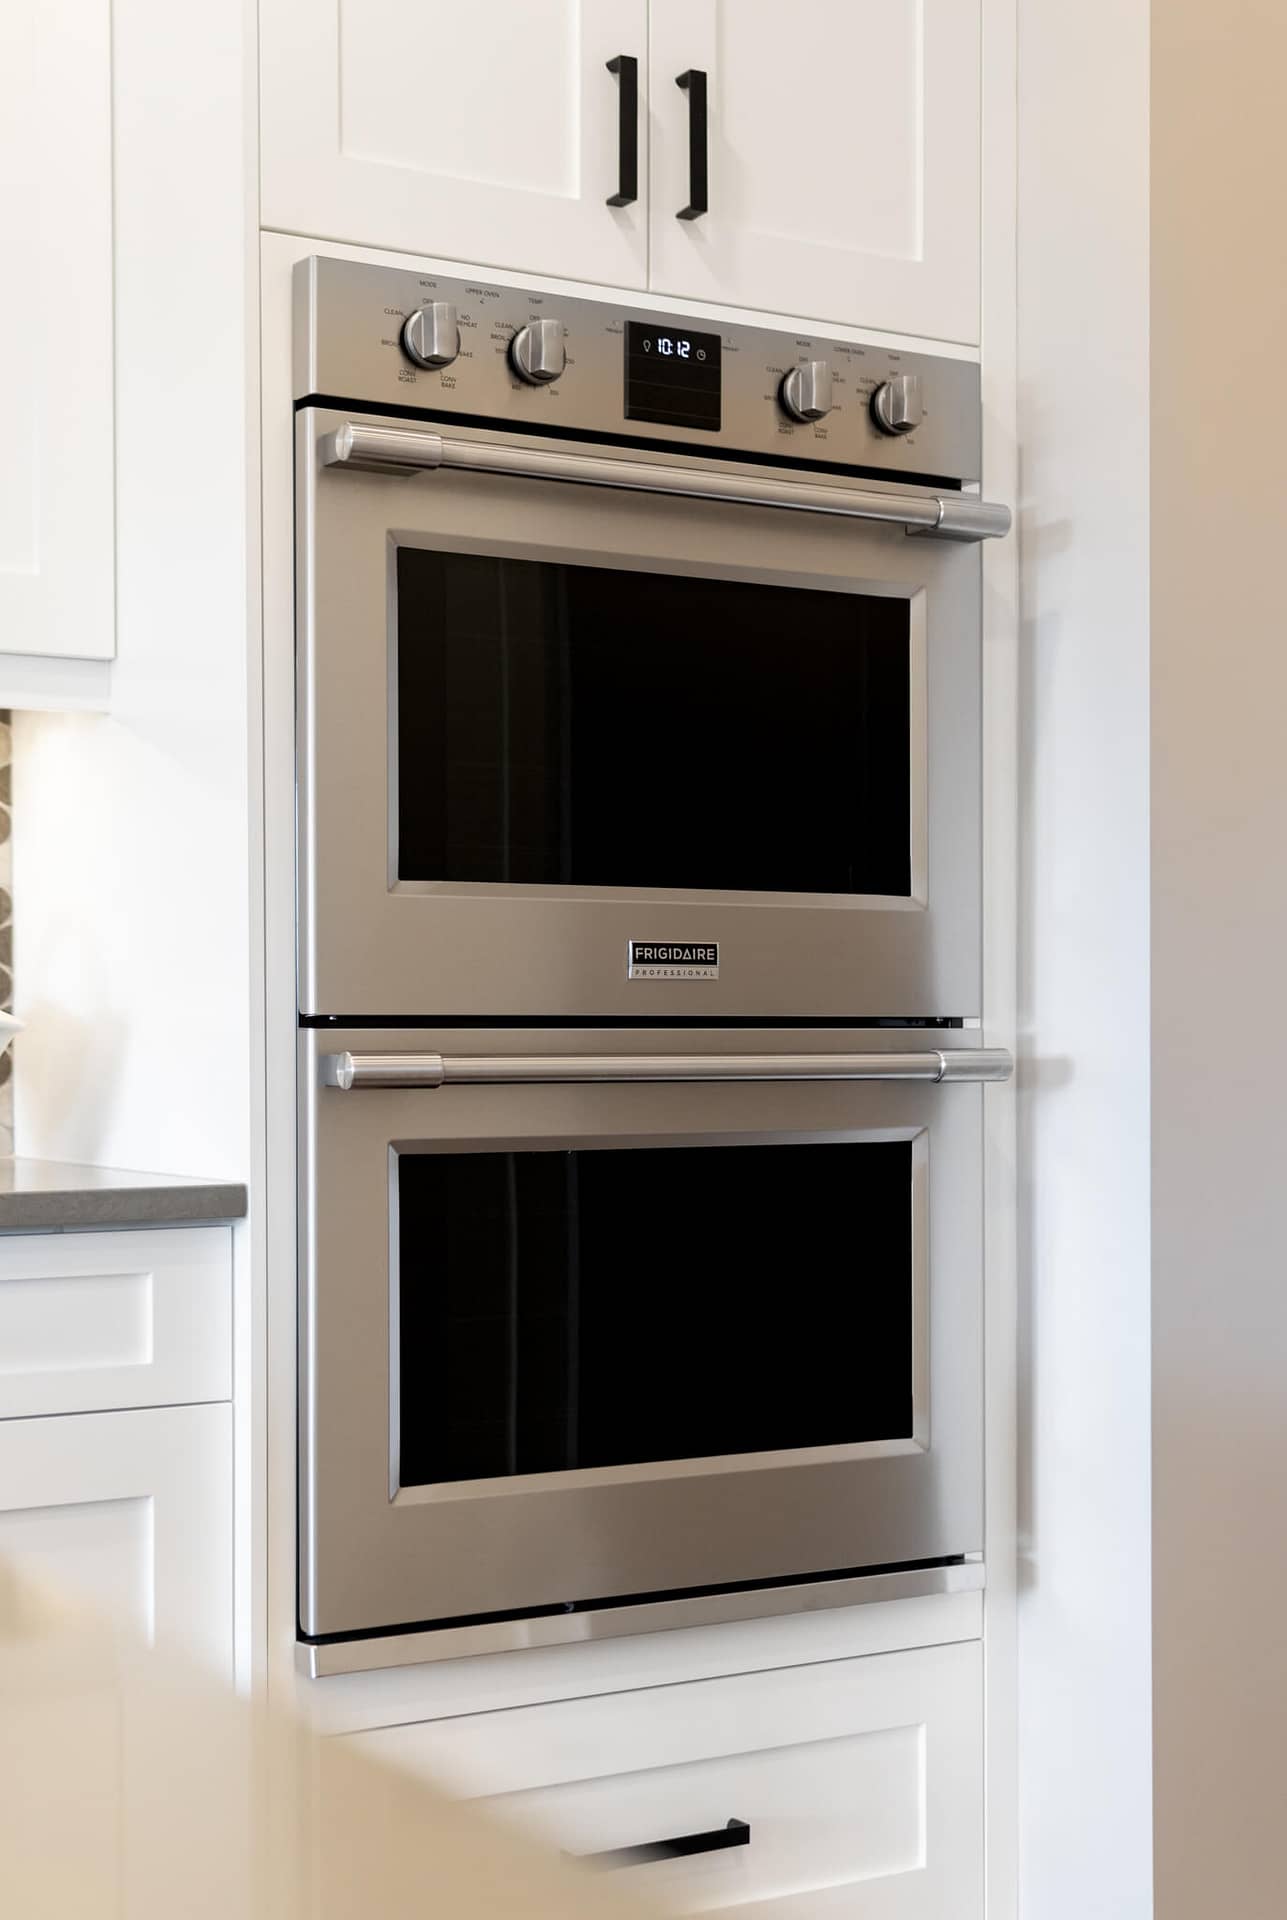 Feature photo of double ovens in kitchen